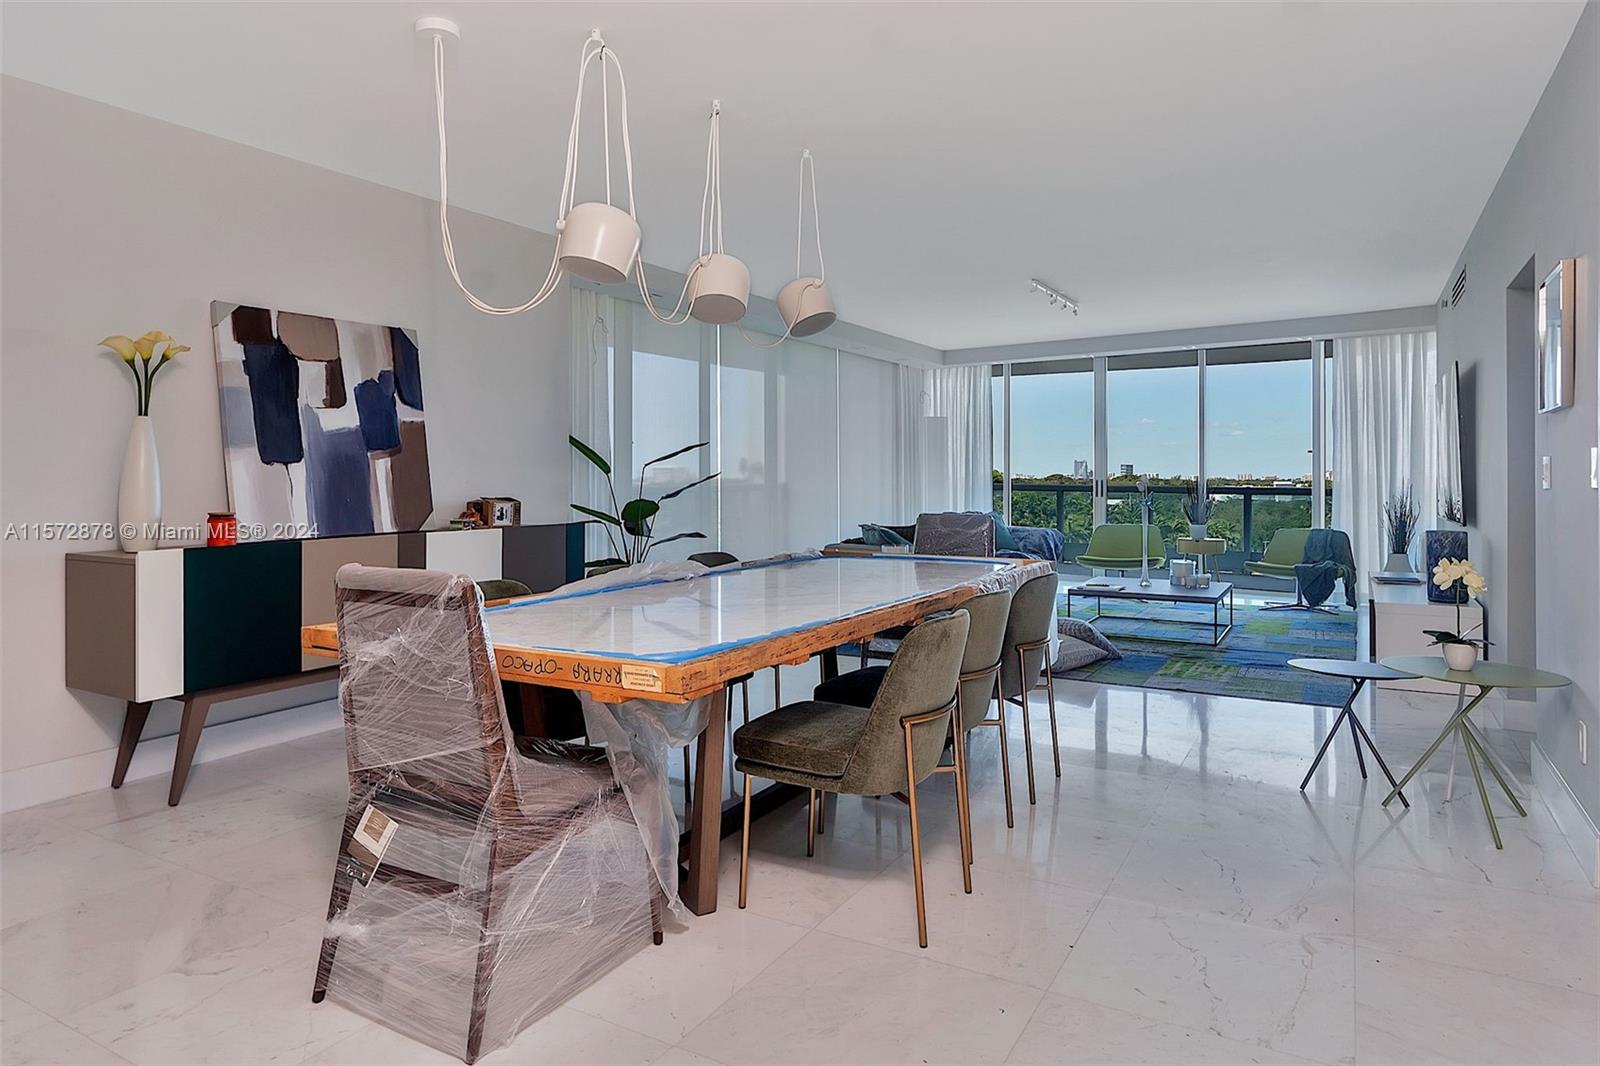 Gorgeous unit located at one of the most exclusive area of Brickell. Apt. Completely remodeled with high end appliances, amazing water view, corner unit, furniture is mostly new. One assigned covered parking space, luxury amenities including Tennis court, convenient store or cafeteria, valet parking by courtesy, no charge and 24 hours security gate entrance.